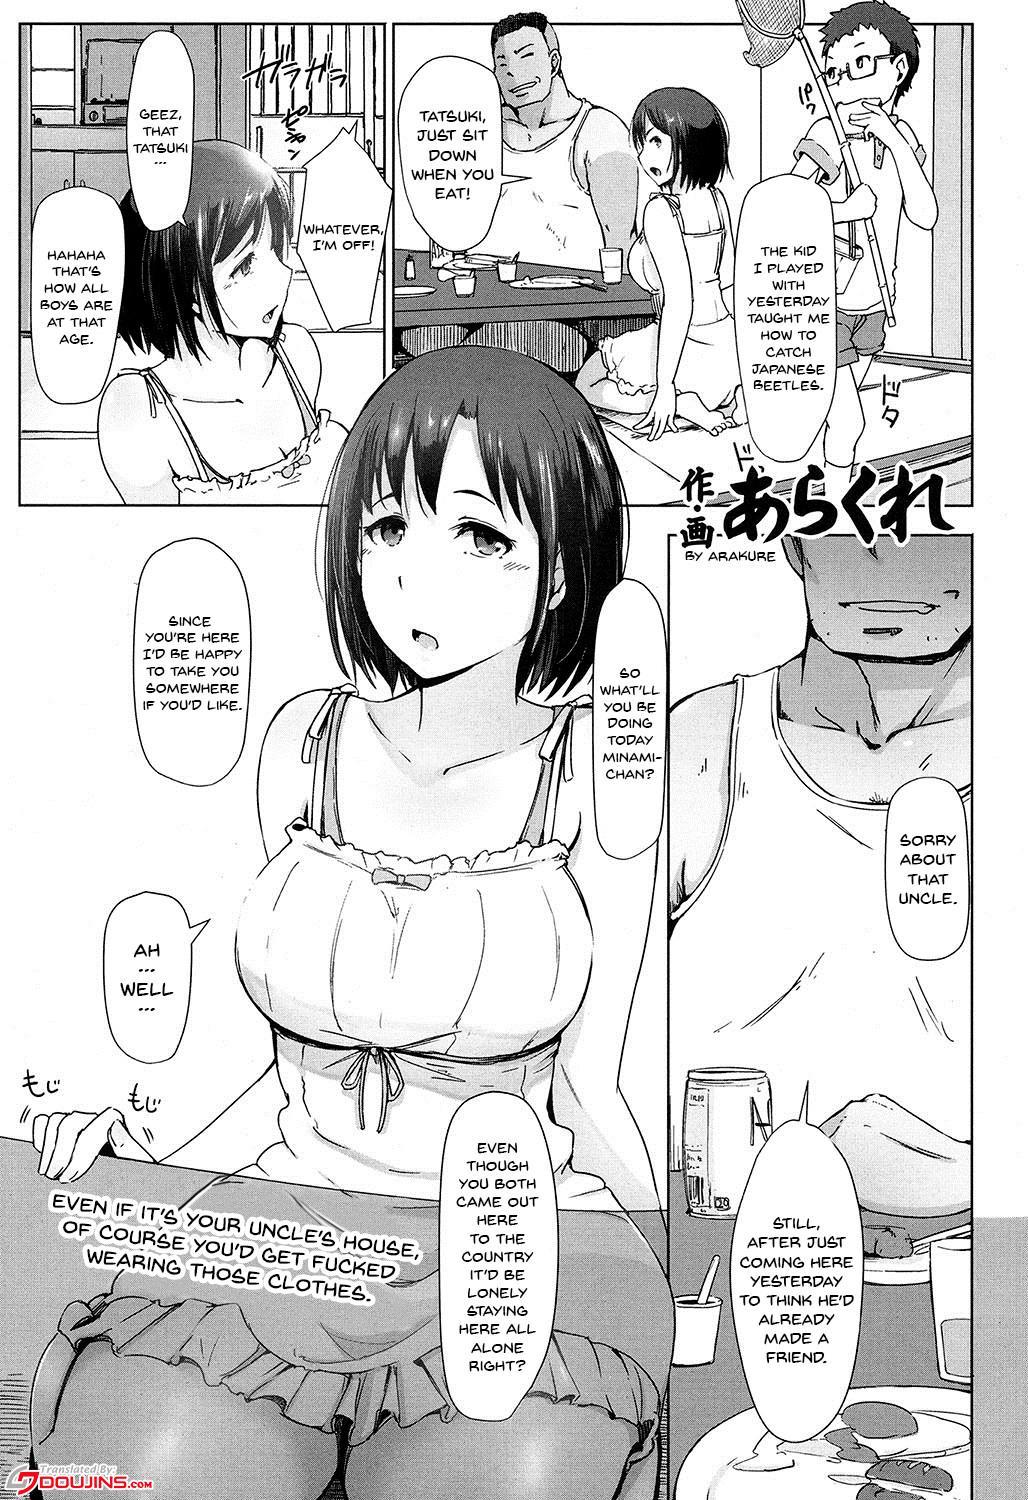 Oji-san ni Sareta Natsuyasumi no Koto | Even If It's Your Uncle's House, Of Course You'd Get Fucked Wearing Those Clothes 0